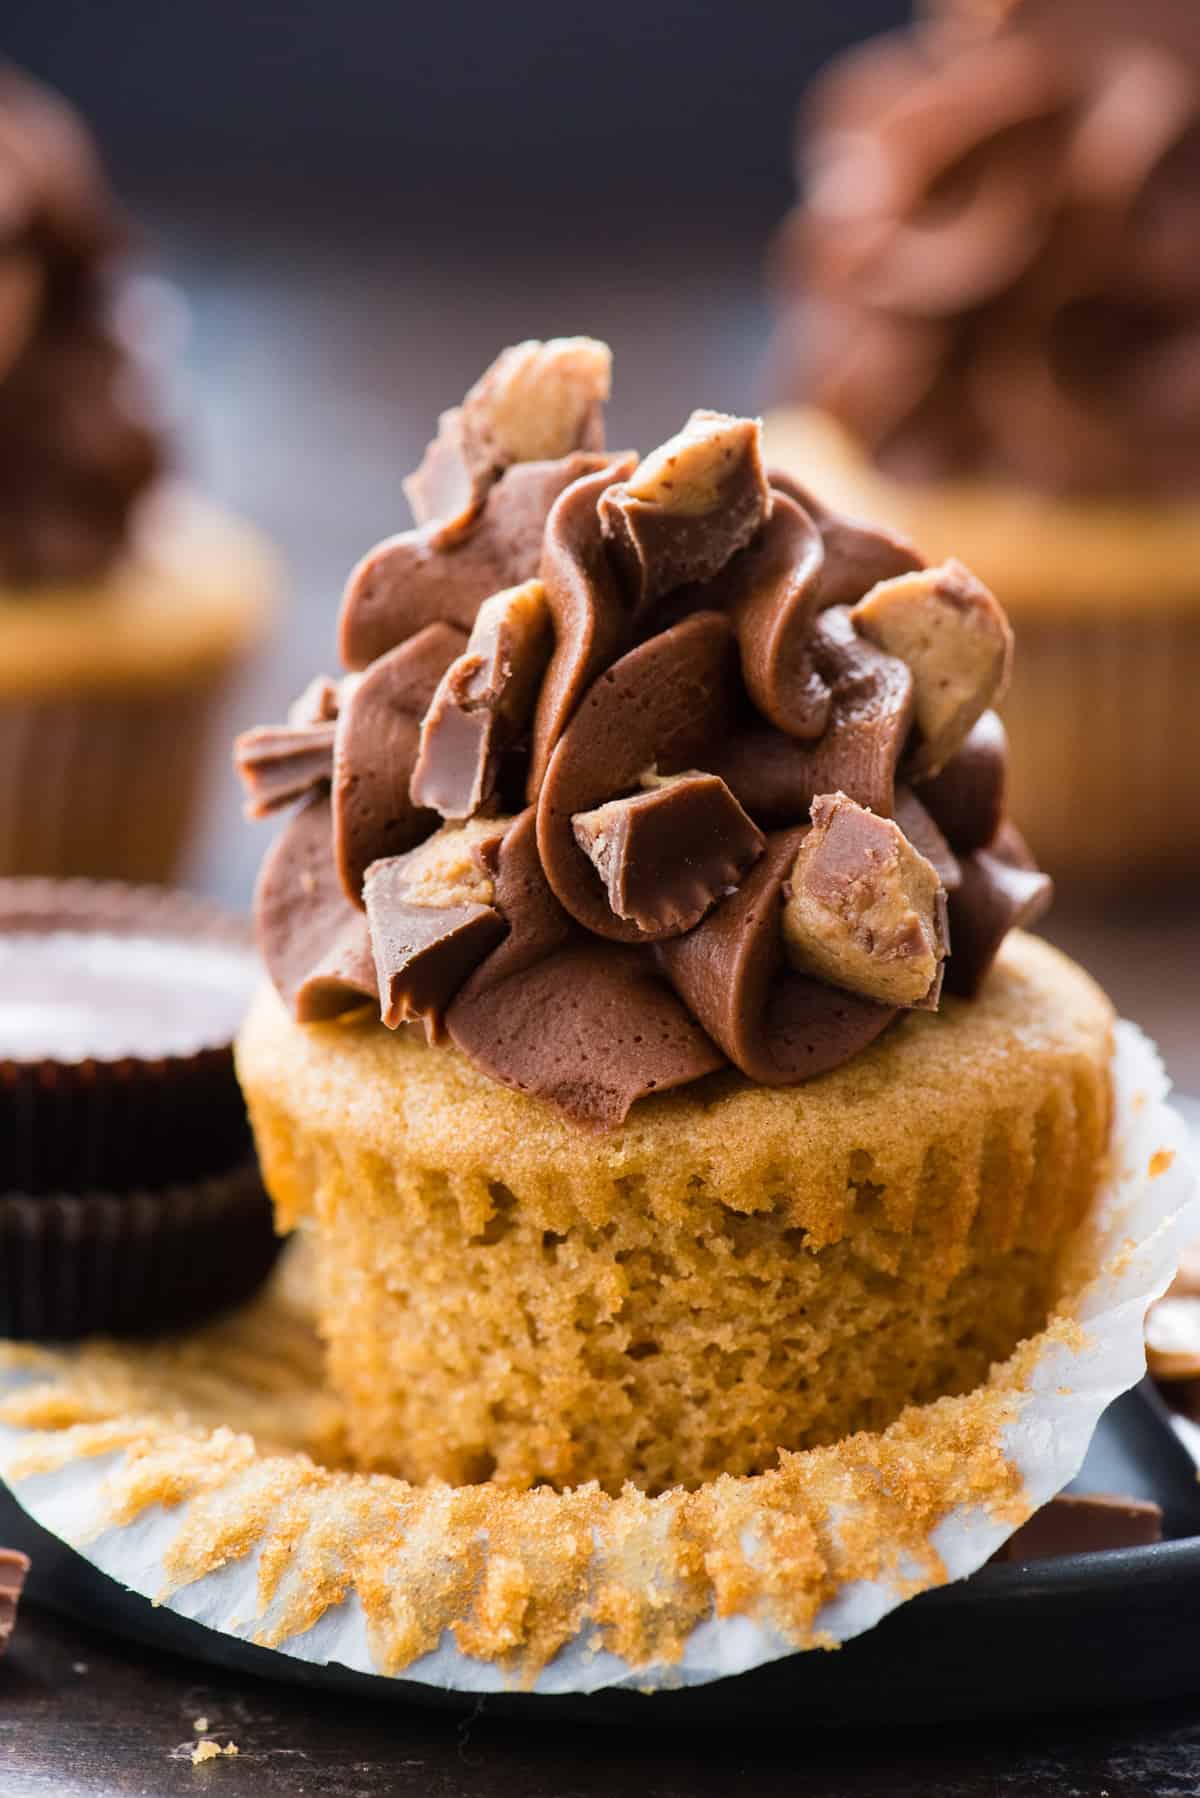 peanut butter cupcake with liner removed with chocolate frosting and reese’s crumbles